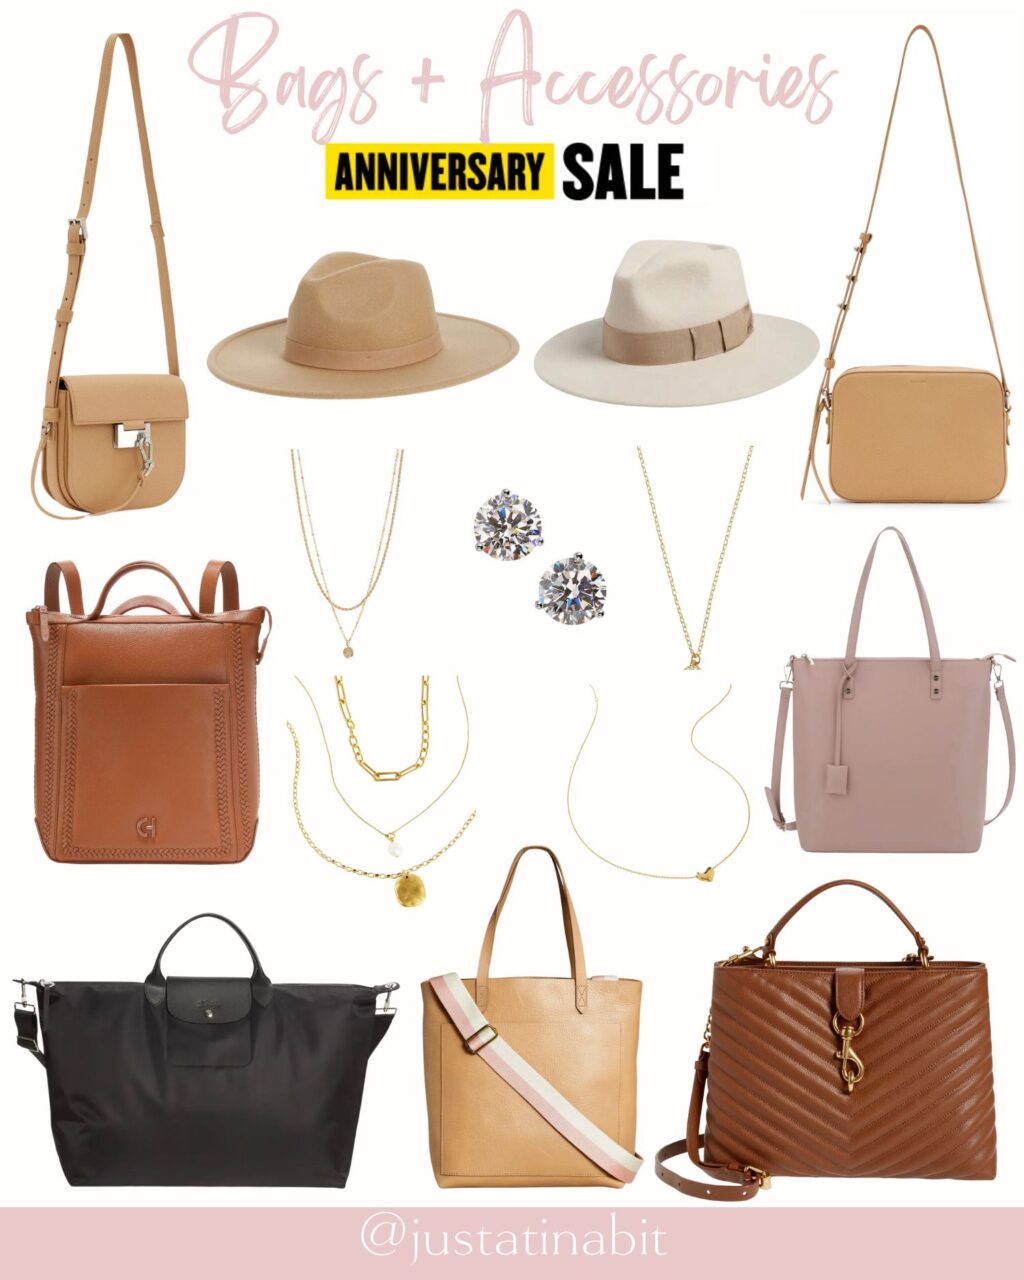 nordstrom anniversary sale 2023 bags and accessories under $200, felt hats, layered gold jewelry